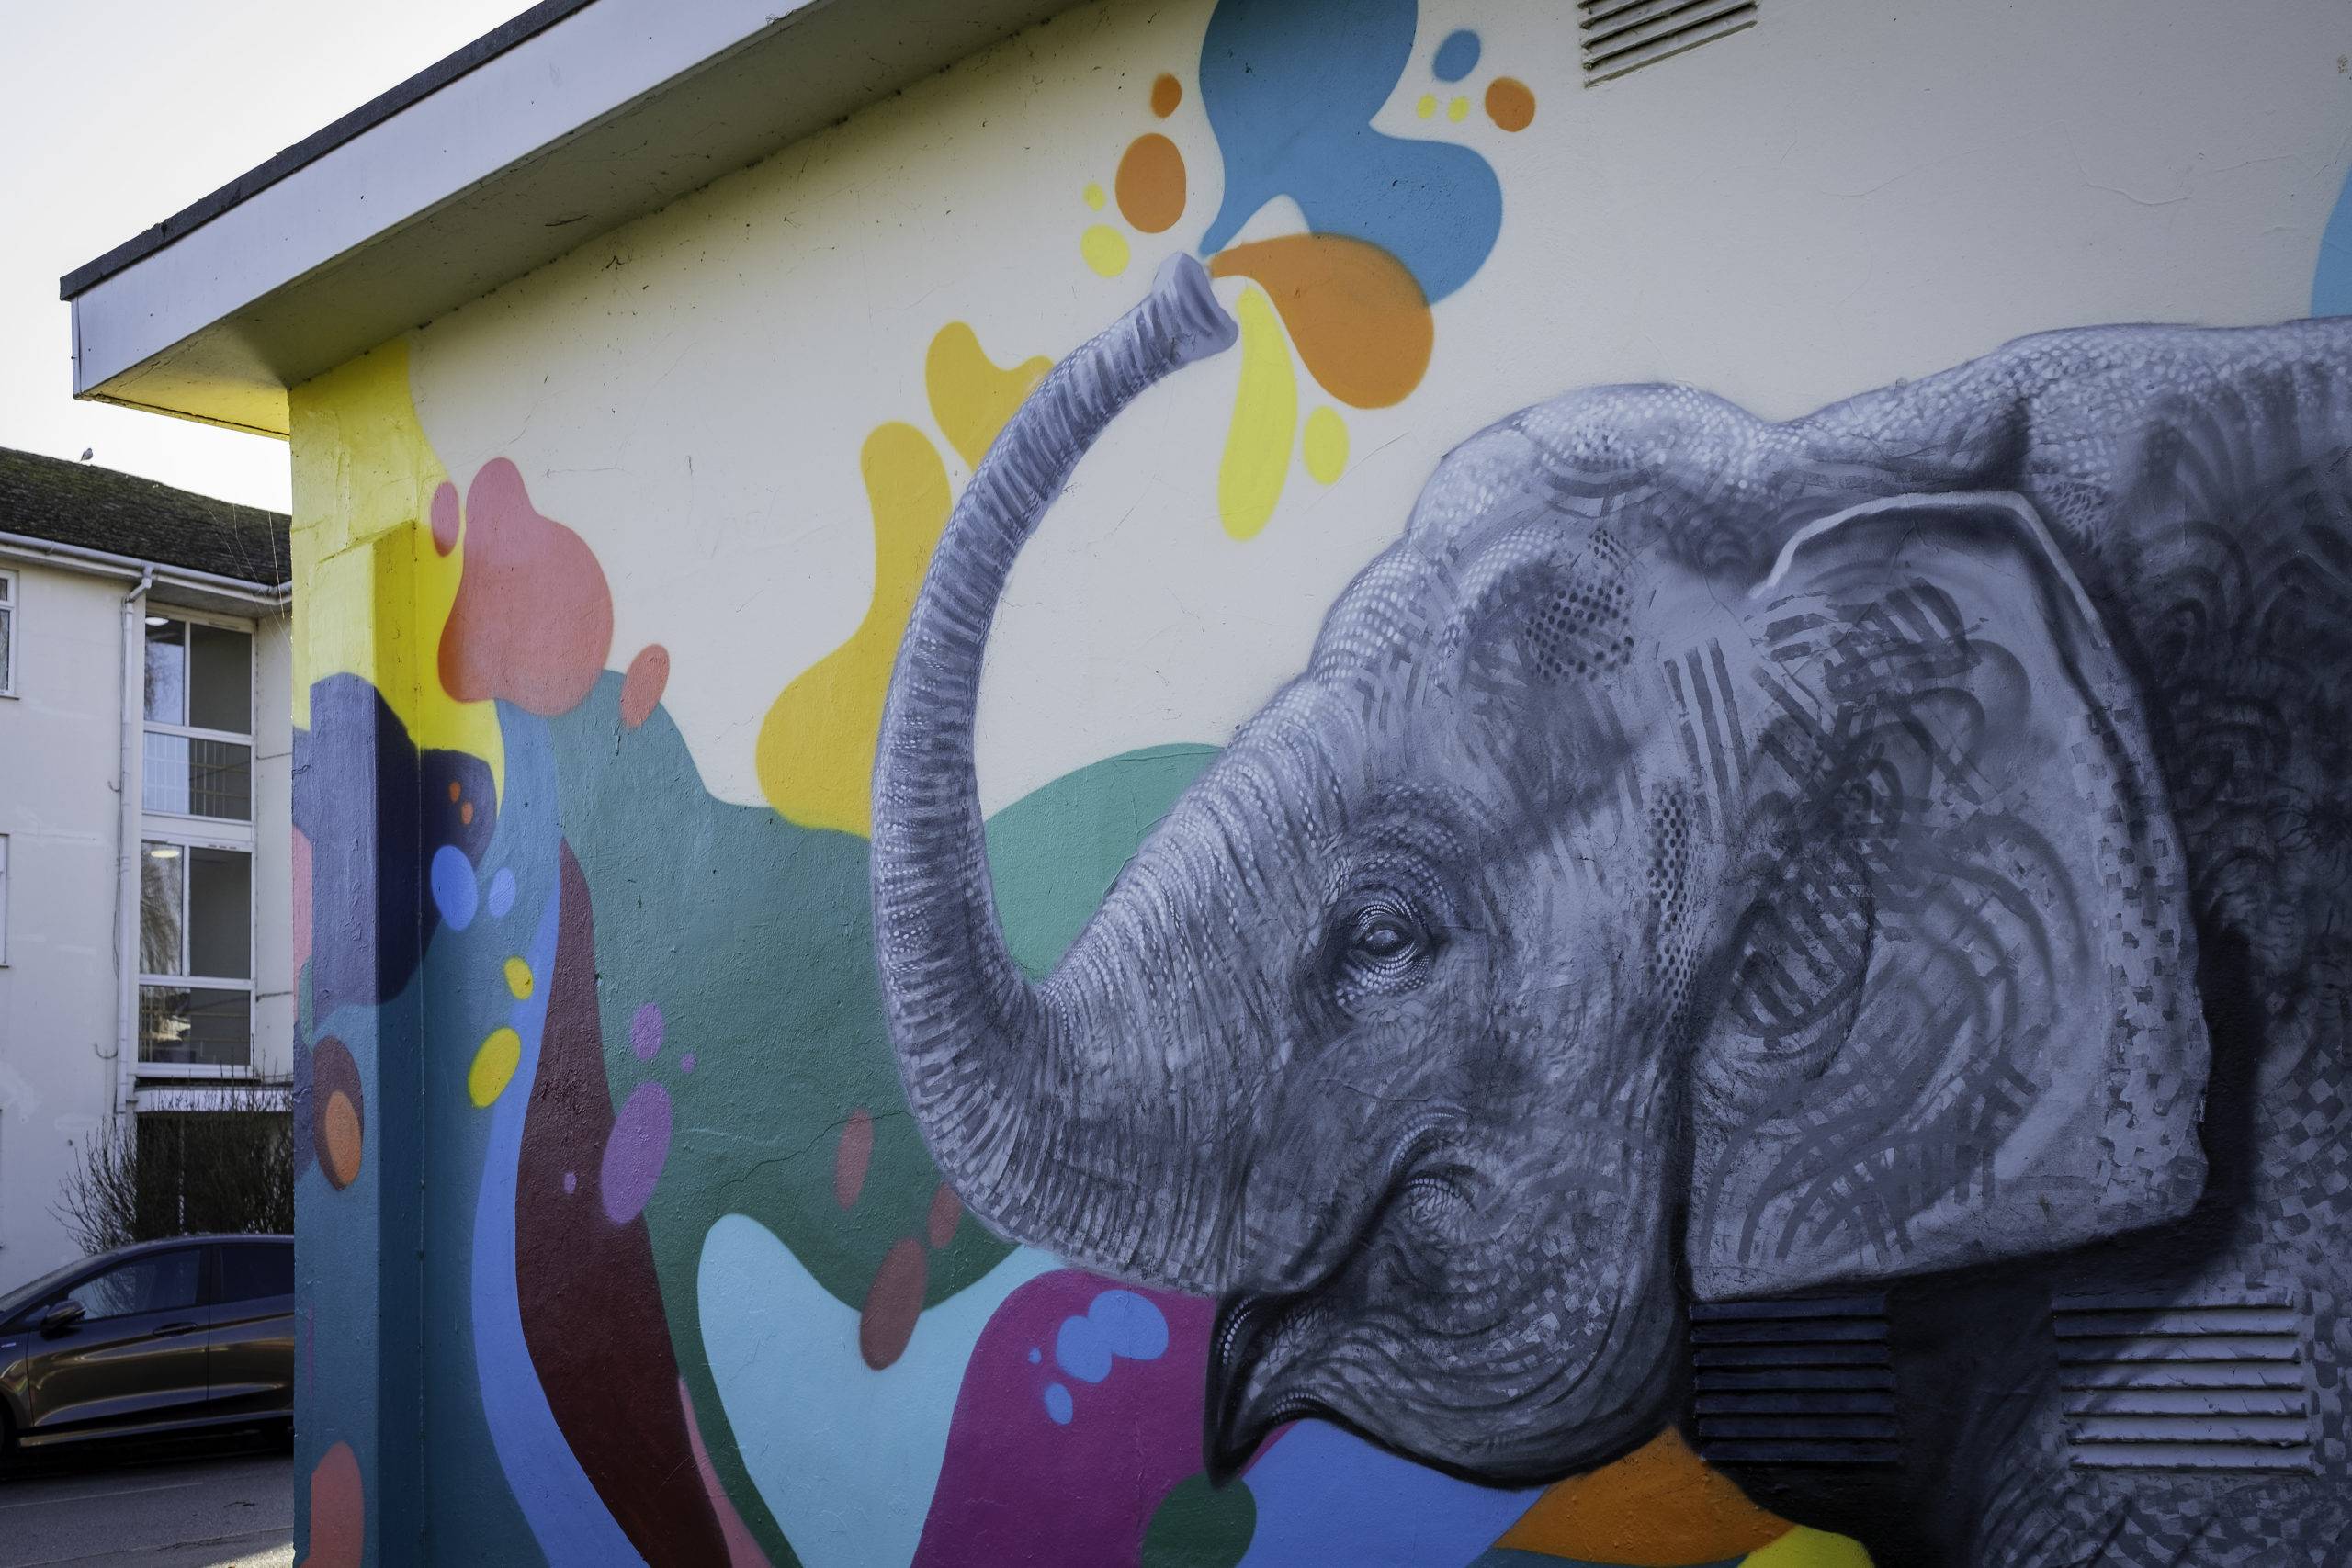 Detail of the Elephant Mural